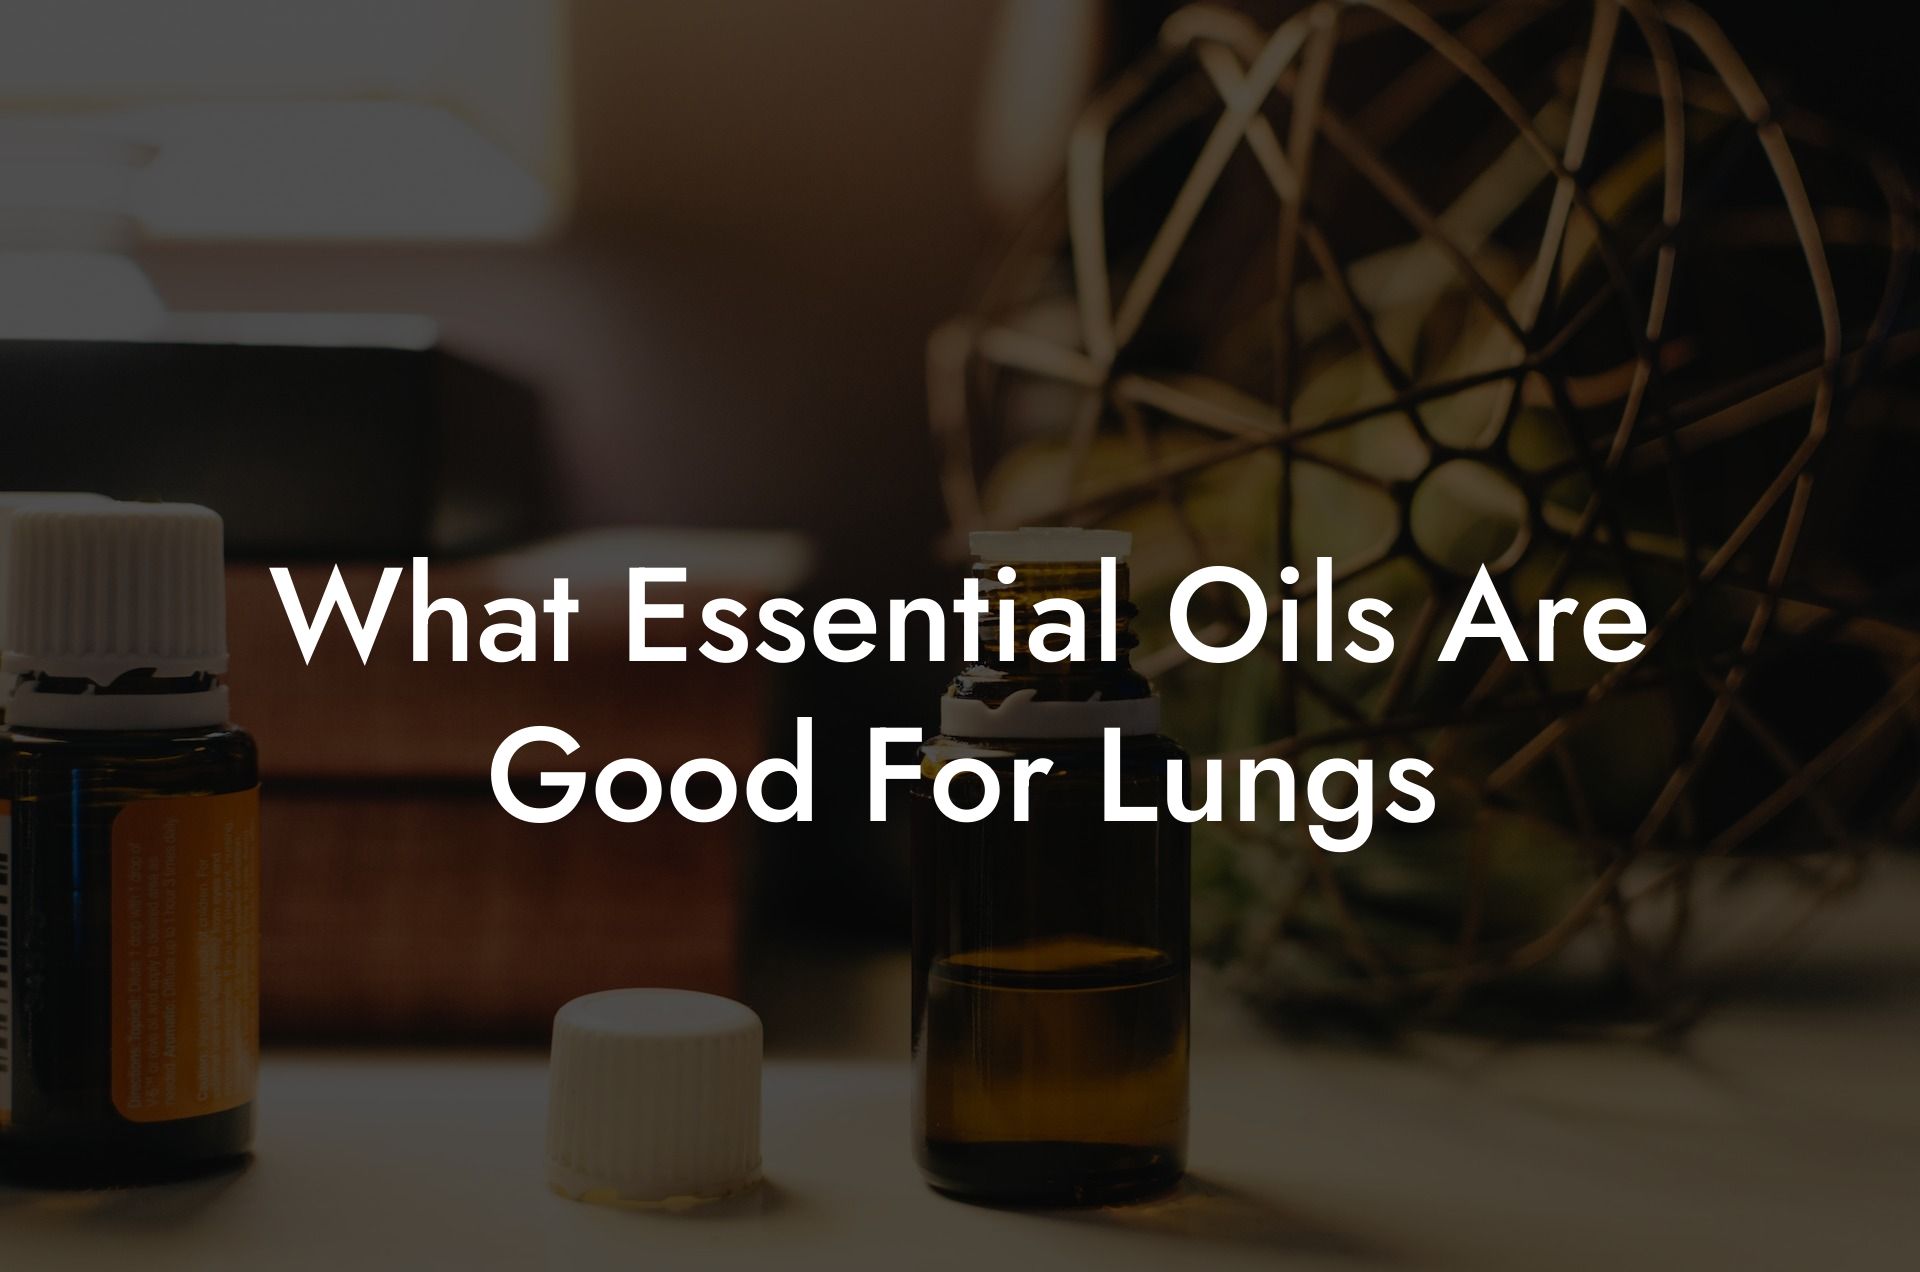 What Essential Oils Are Good For Lungs